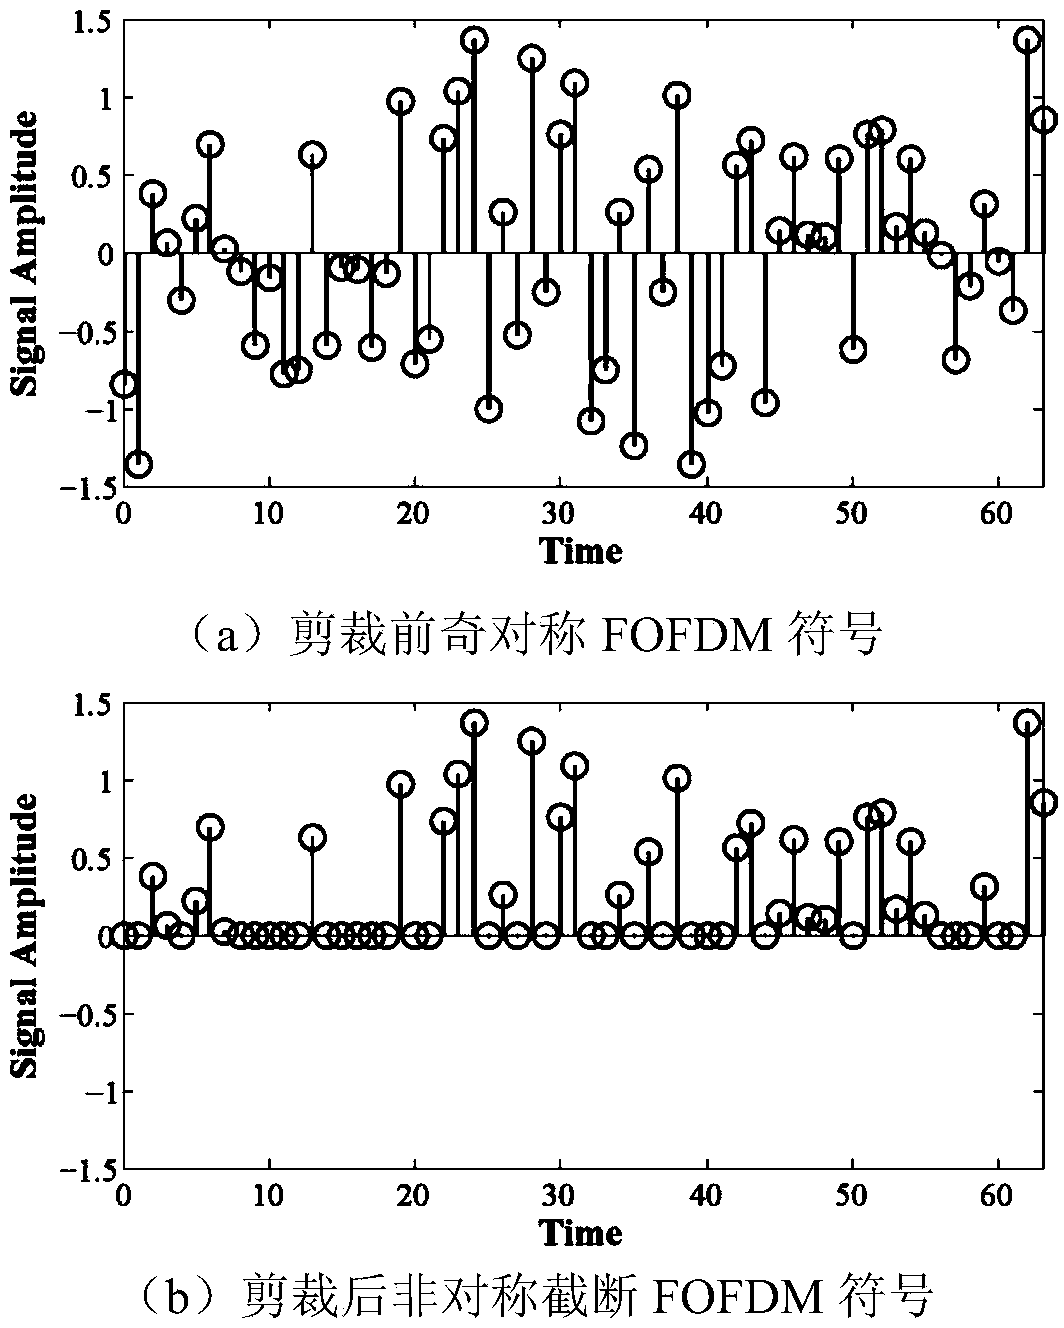 Method for achieving asymmetrically clipped optical orthogonal frequency division multiplexing (ACO-OFDM) based on discrete cosine transform (DCT)